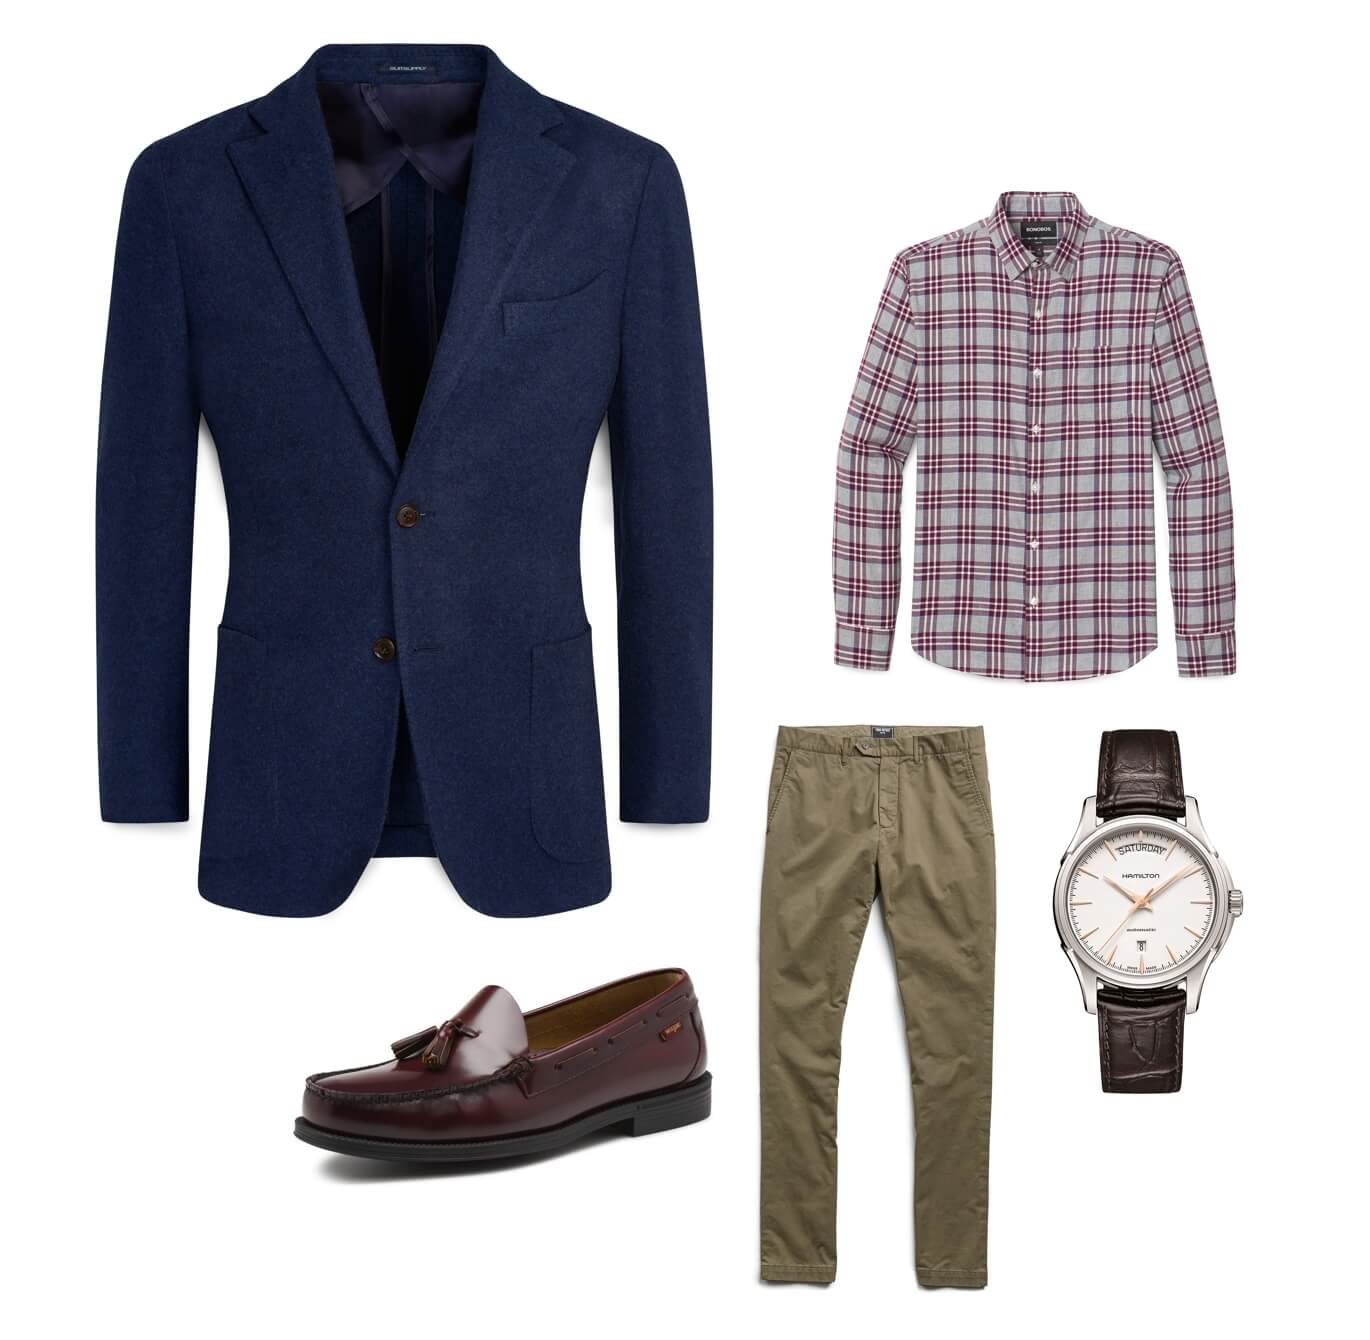 Thanksgiving dinner menswear outfit inspiration